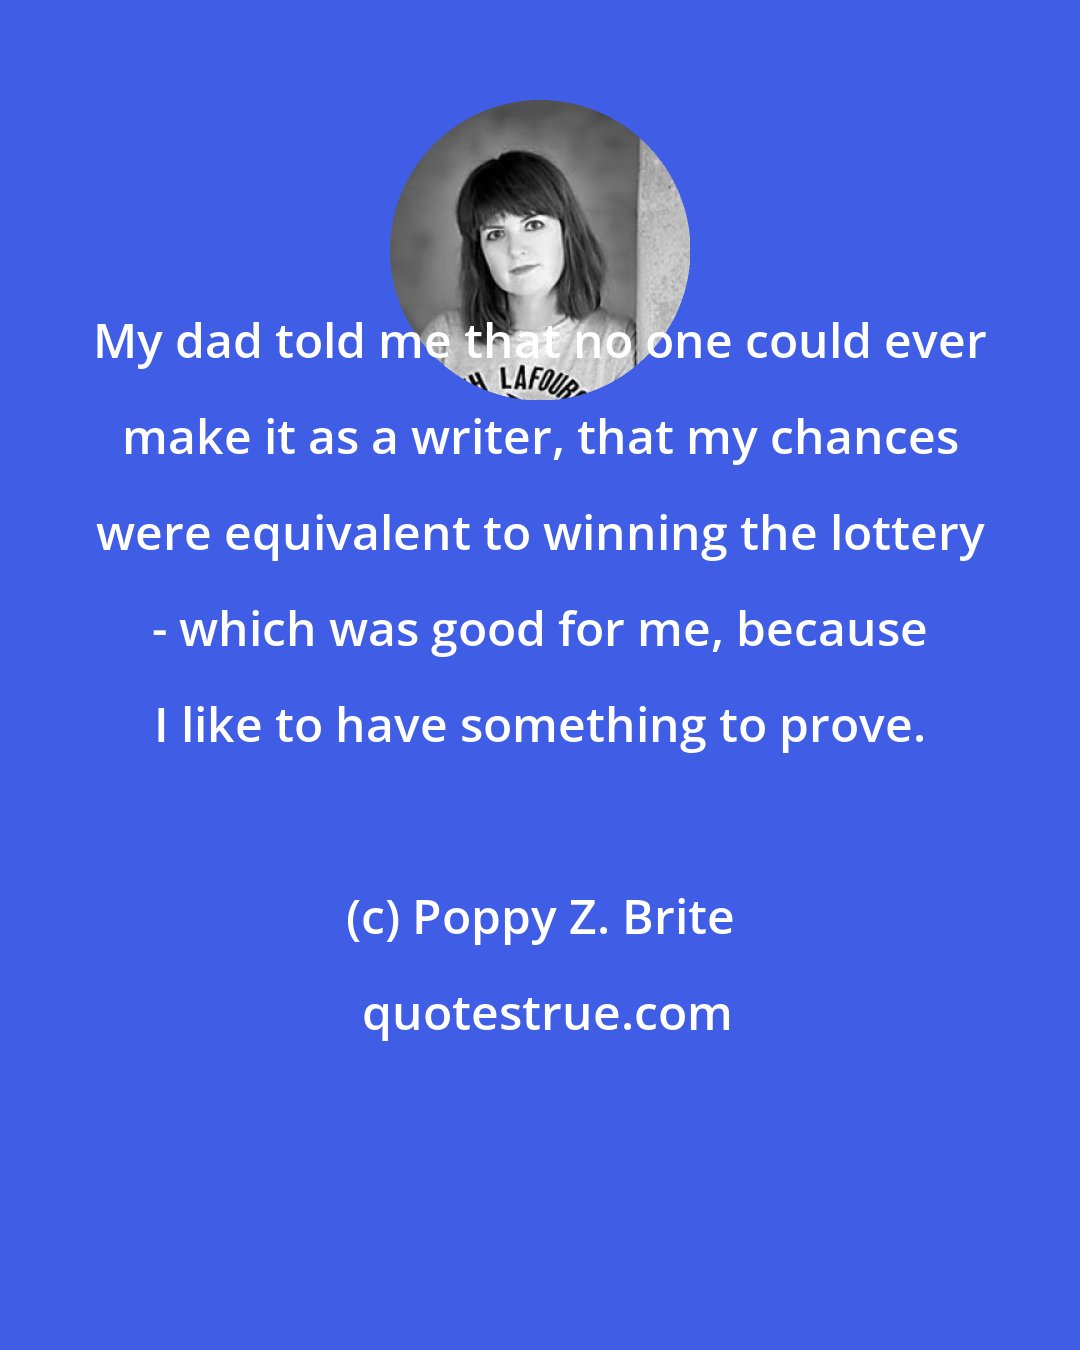 Poppy Z. Brite: My dad told me that no one could ever make it as a writer, that my chances were equivalent to winning the lottery - which was good for me, because I like to have something to prove.